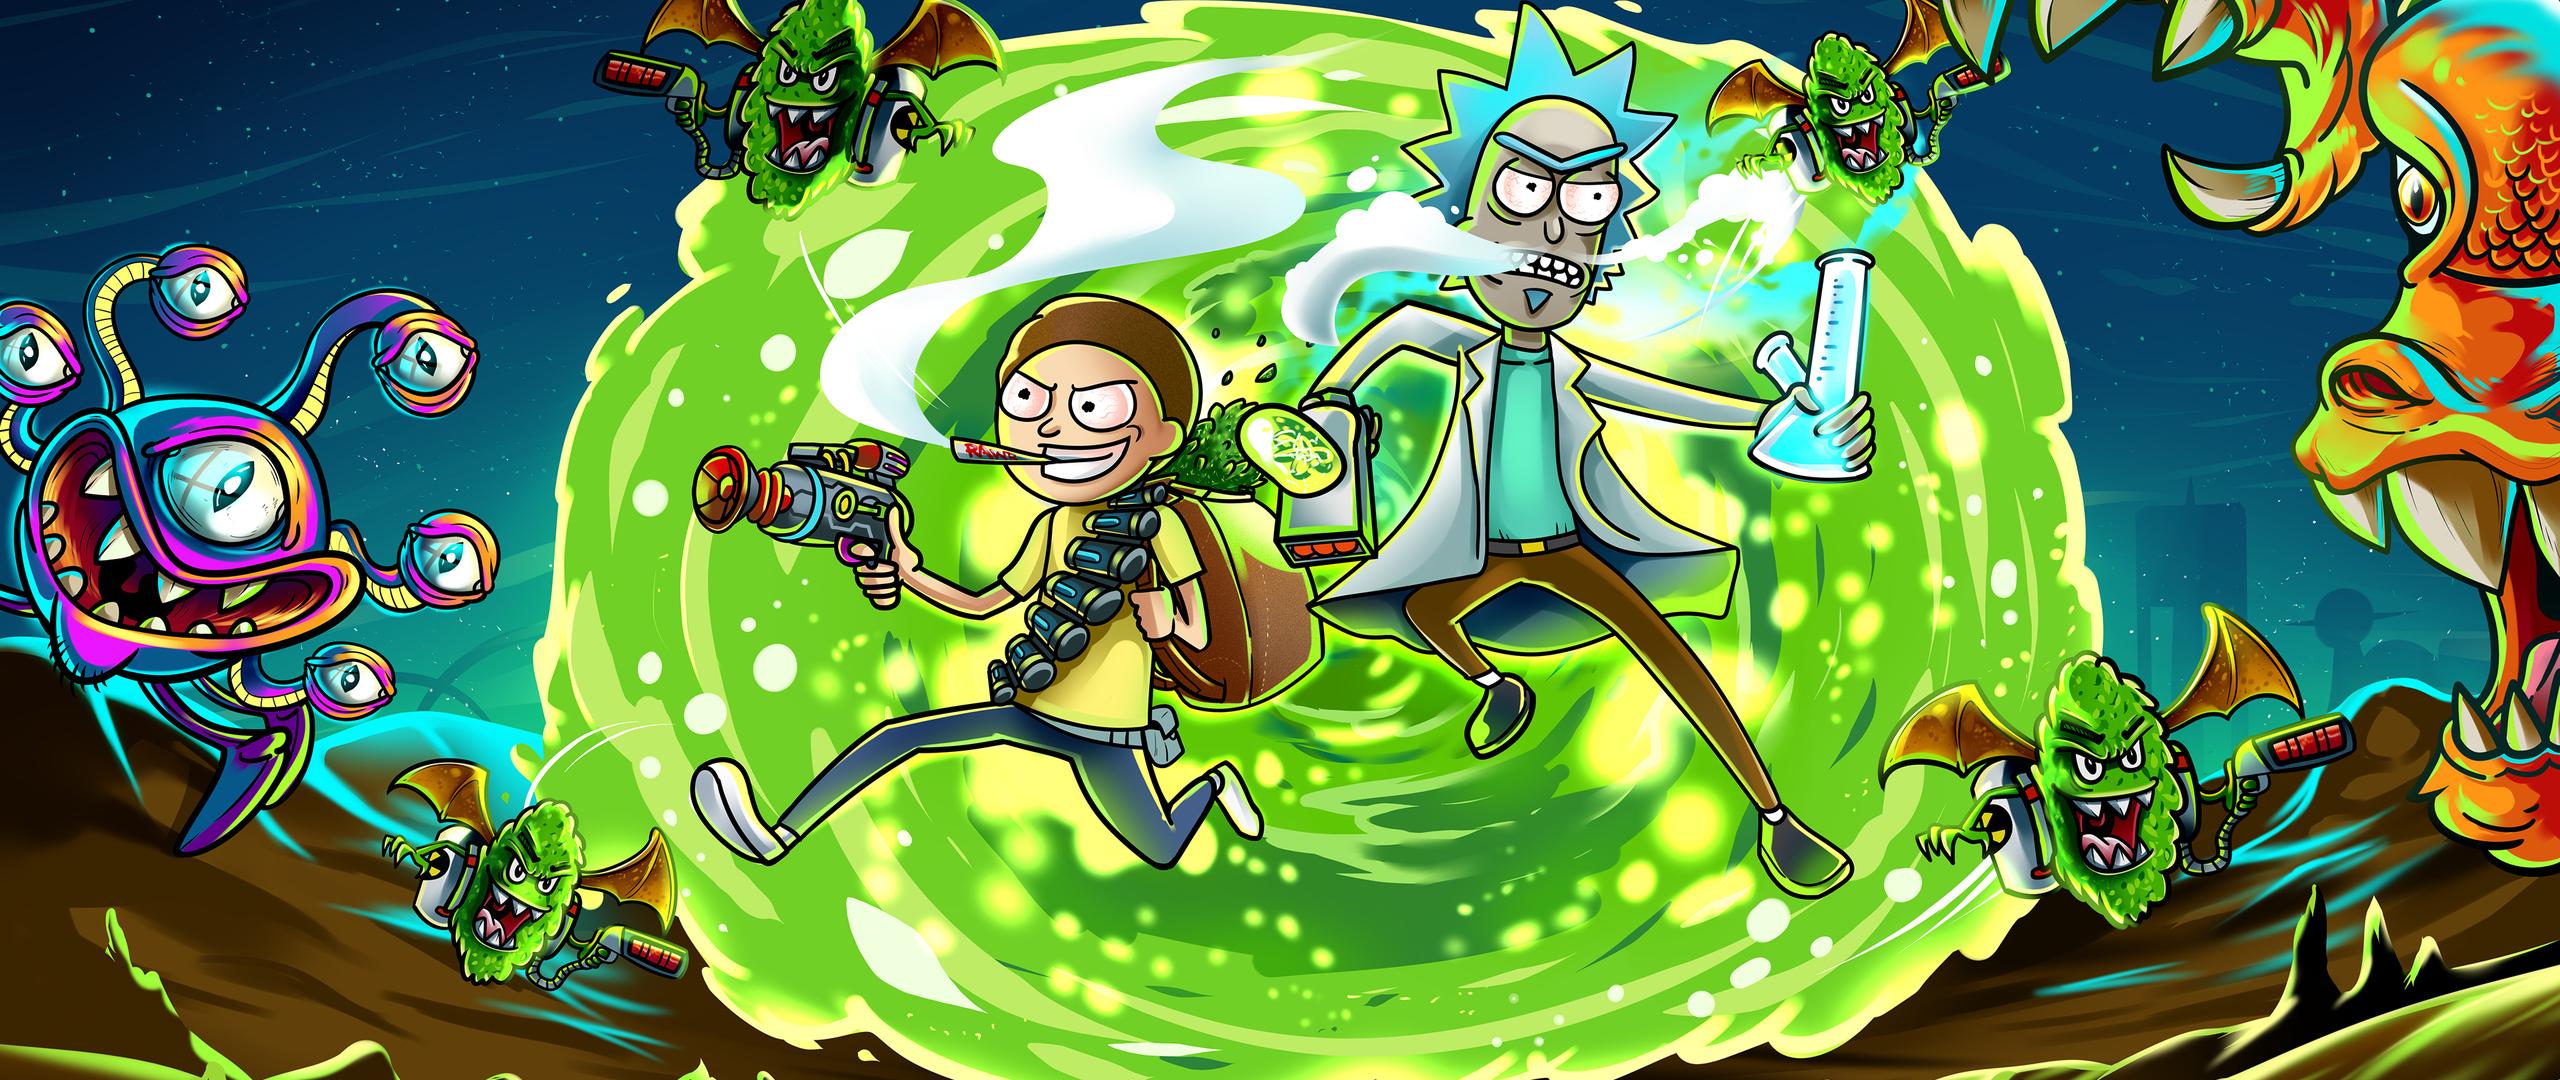 2560 x 1080 · jpeg - 2560x1080 Rick And Morty In Another Dimension Illustration 2560x1080 ...